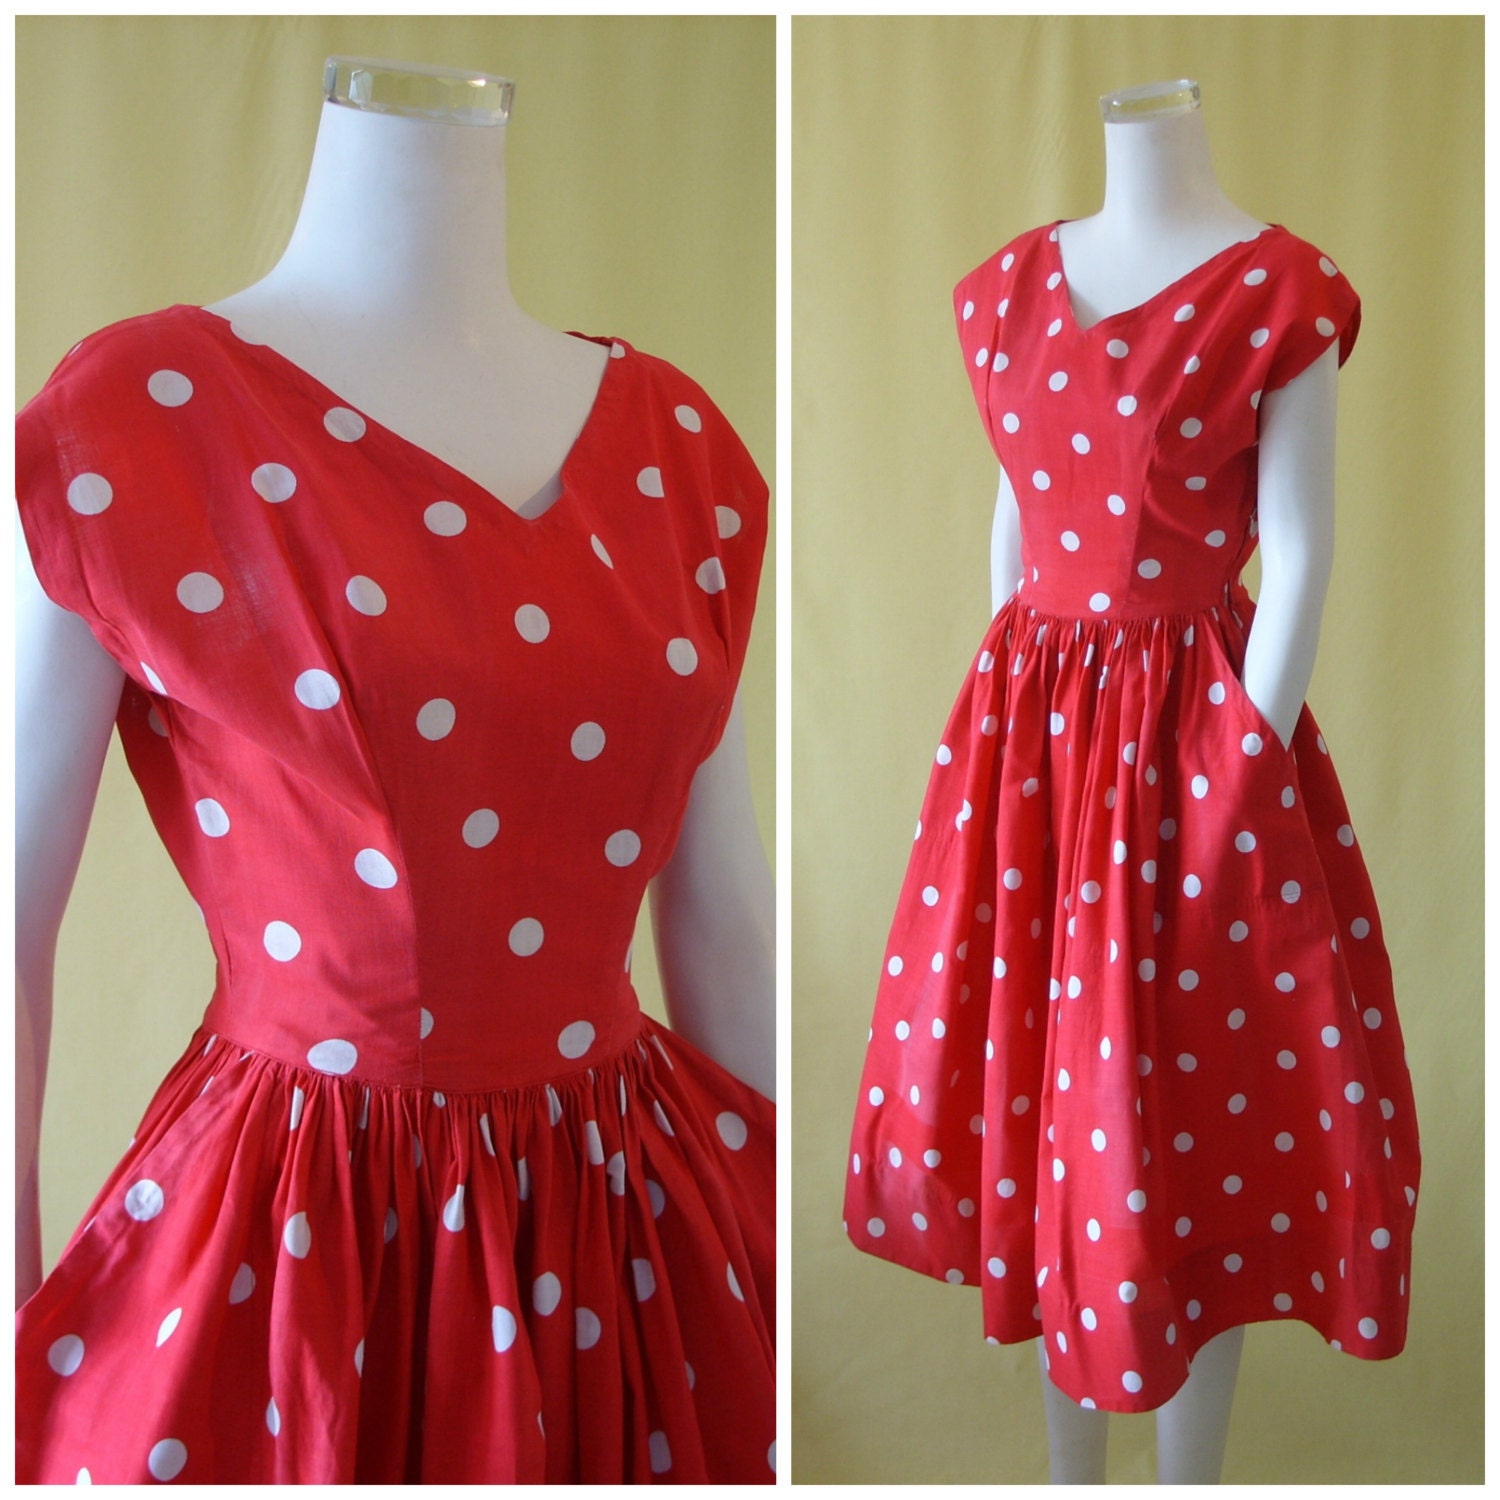 REDUCED Adorable 1950s Sun Dress / 50s Day Dress / Red with